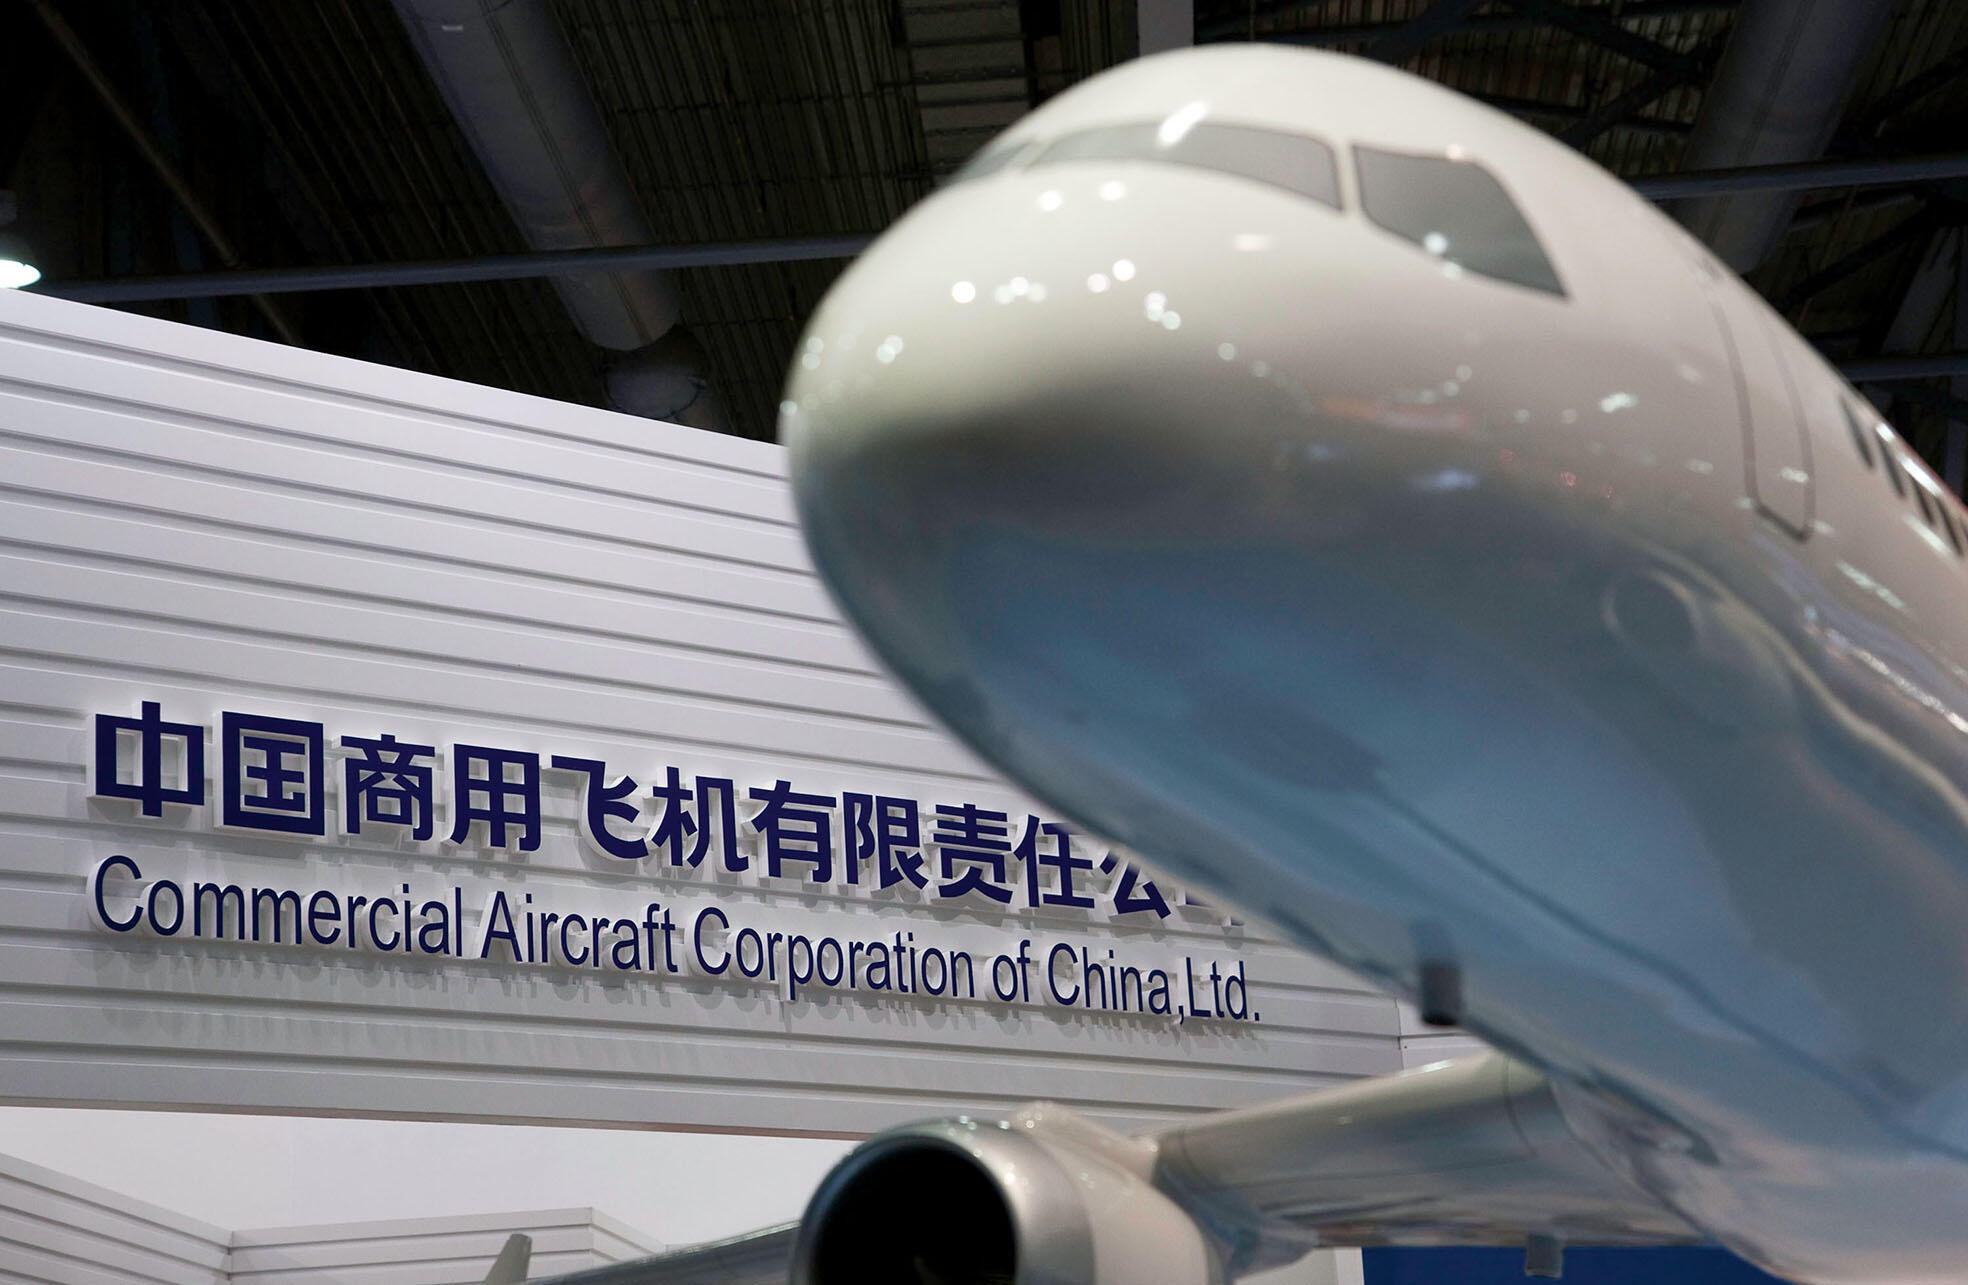 Commercial Aircraft Corporation of China, whose booth at a trade fair is shown here, announced orders for 100 new C919 jetliners in November 2010. (Photo by Jerome Favre/Bloomberg via Getty Images.)